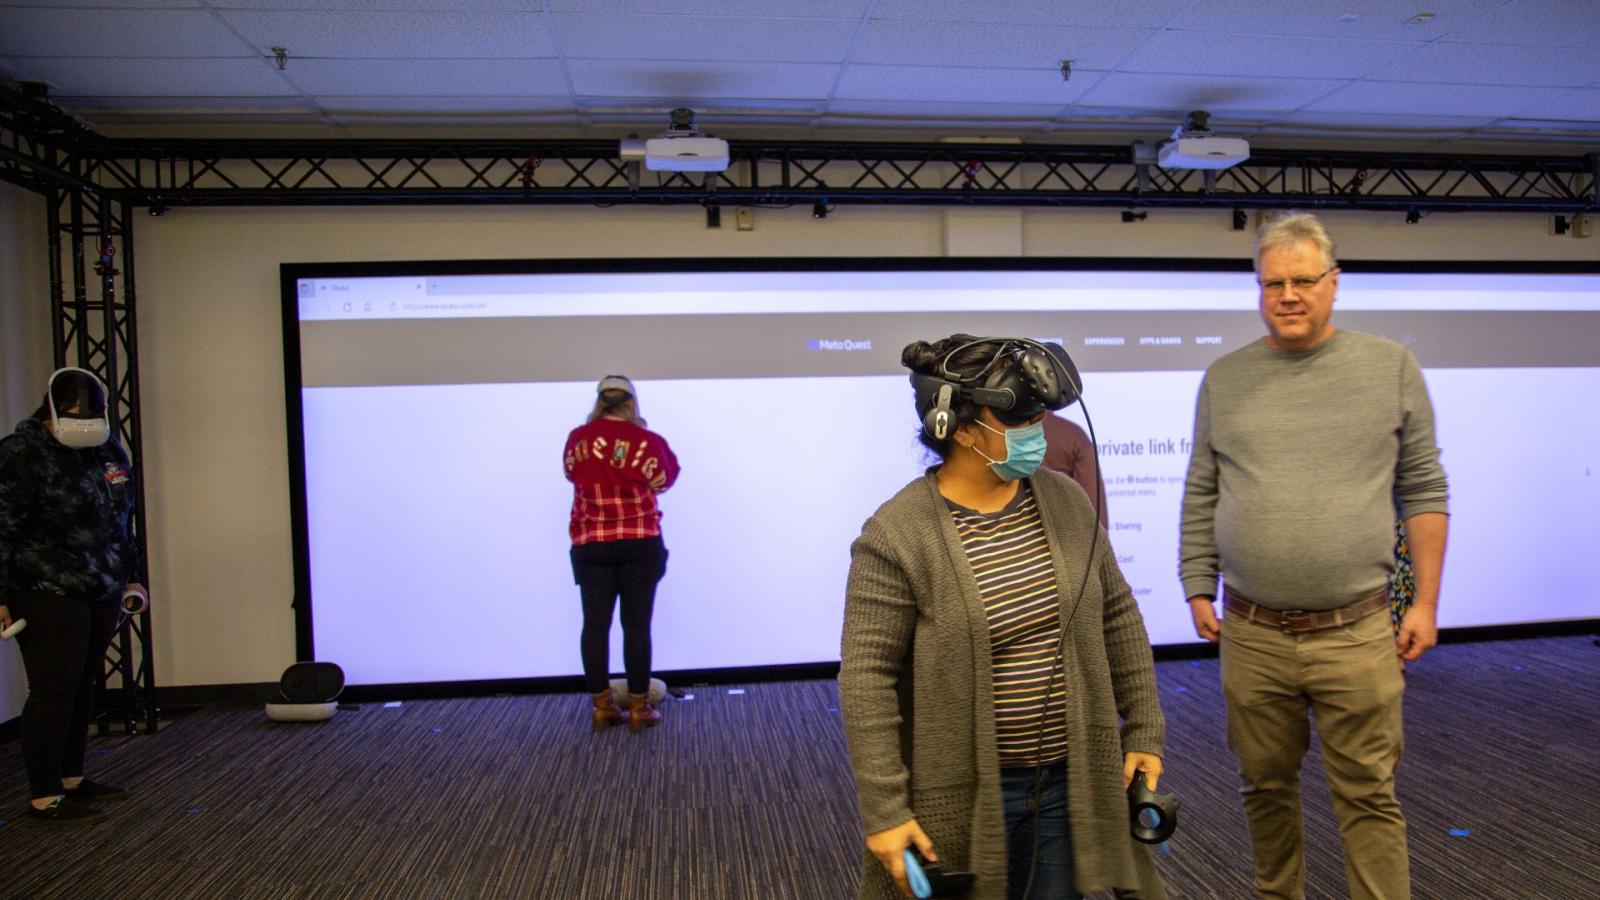 Stephen Adams poses with people using VR technology